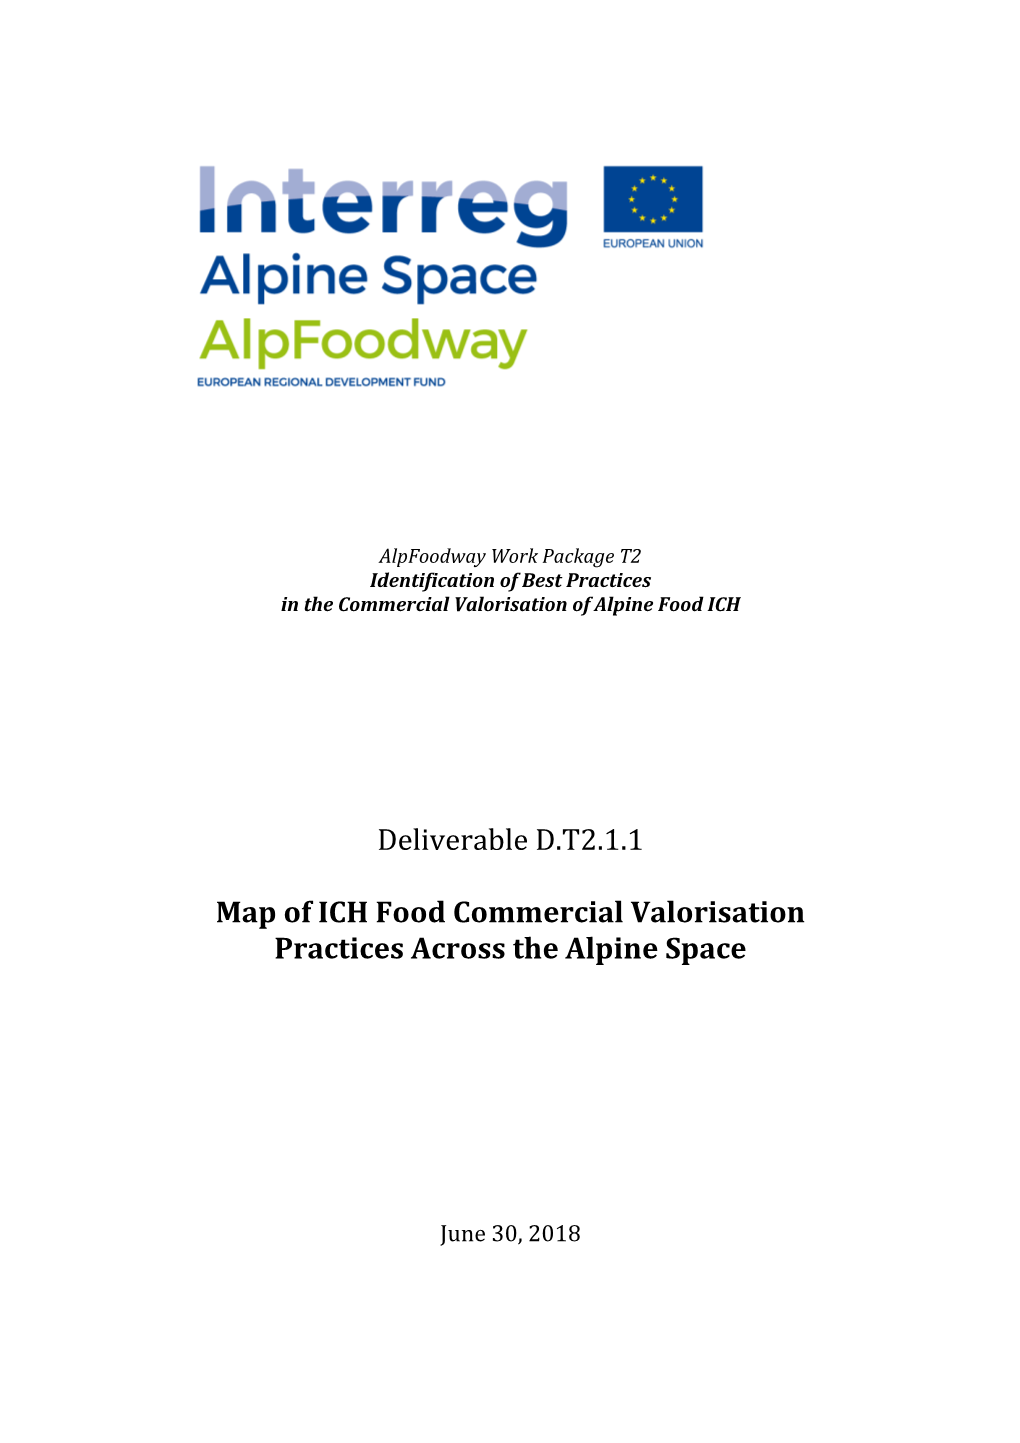 Alpfoodway Work Package T2 Identification of Best Practices in the Commercial Valorisation of Alpine Food ICH